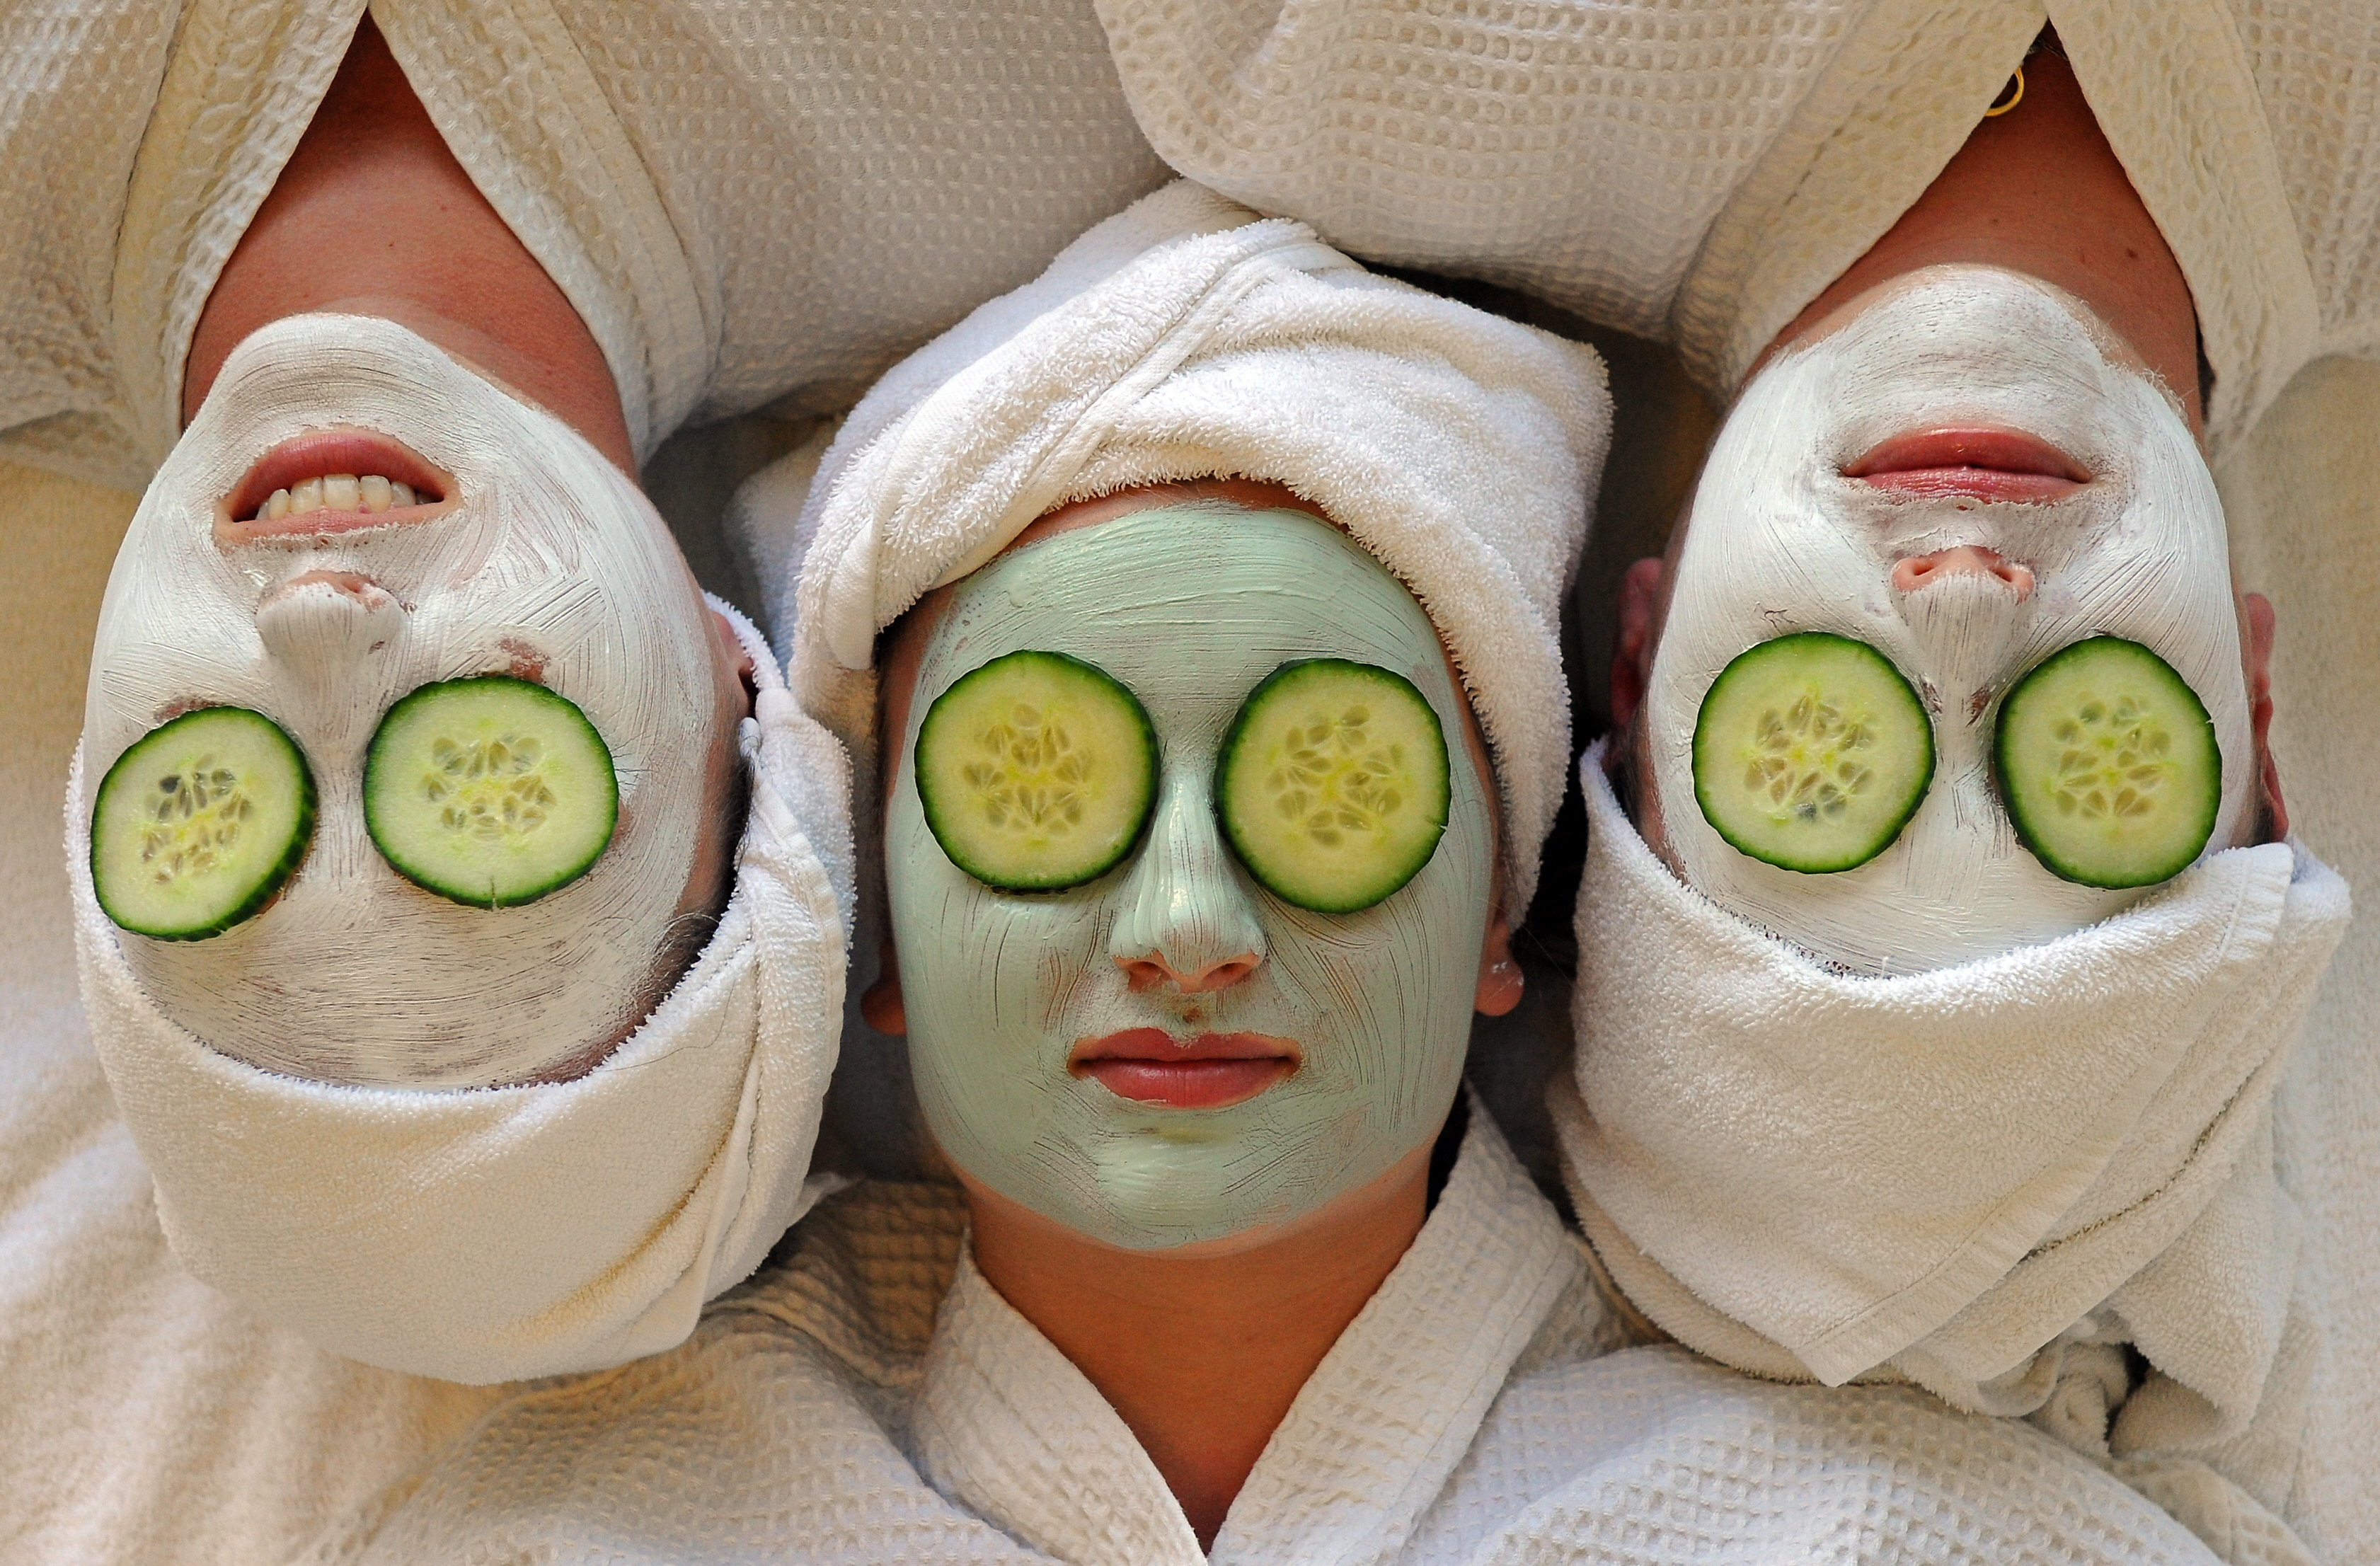 Women undergo facial beauty treatments at the spa on Daydream Island in the Whitsundays archipelago off Queensland on July 12, 2010. Australians are escaping the unusually cold and wet winter in the south of the country to holiday on tropical islands off the eastern seaboard. AFP PHOTO / Torsten BLACKWOOD 